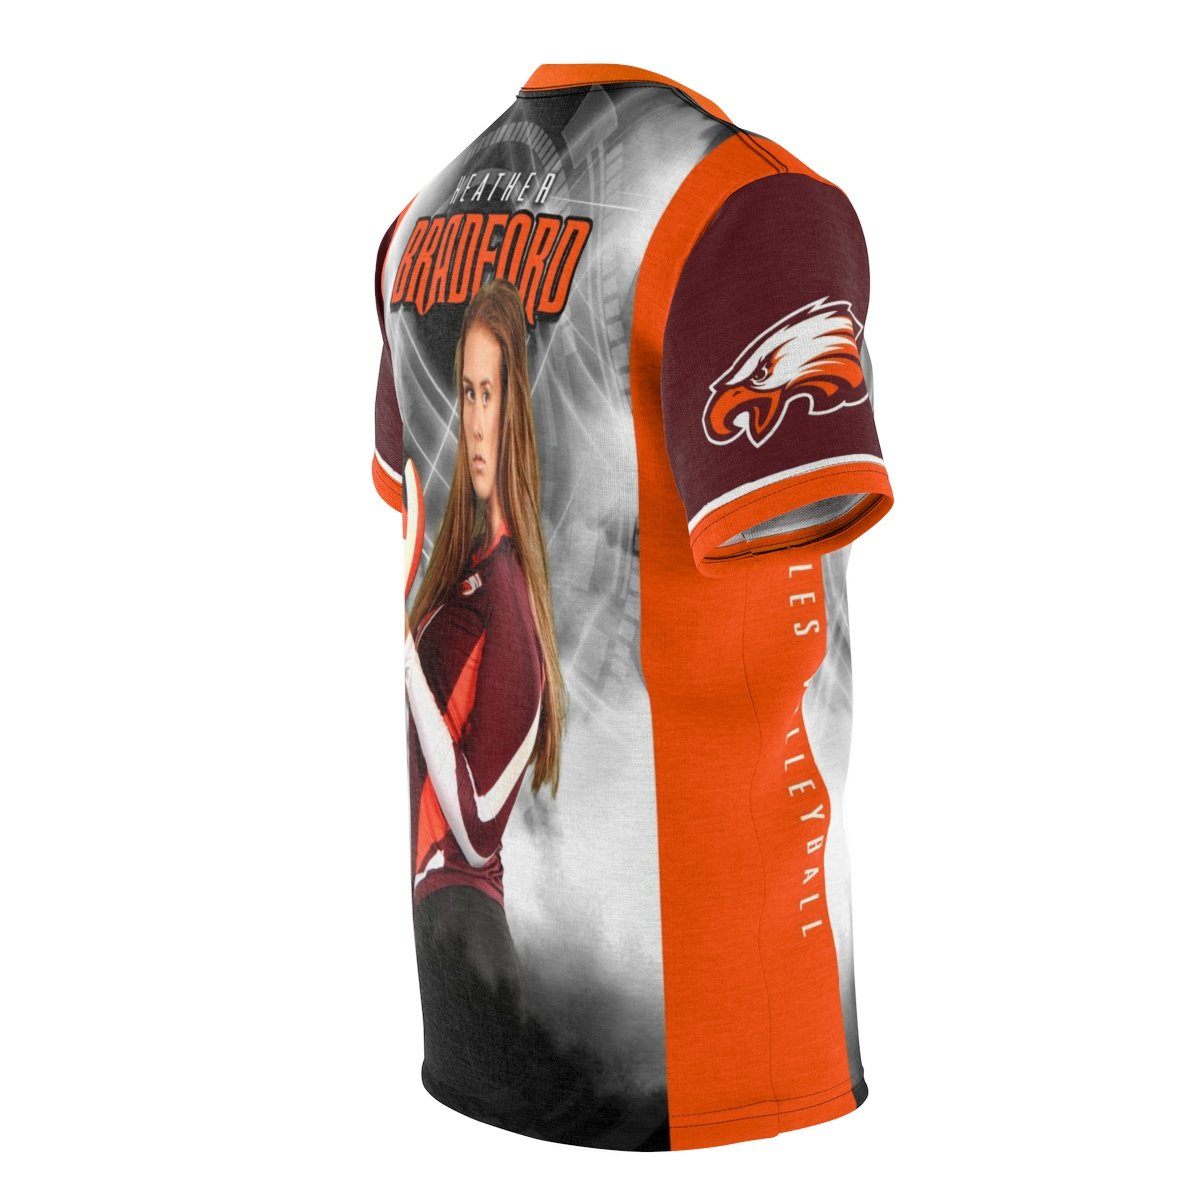 Light Storm - V.5 - Extreme Sportswear Cut & Sew Shirt Template-Photoshop Template - Photo Solutions